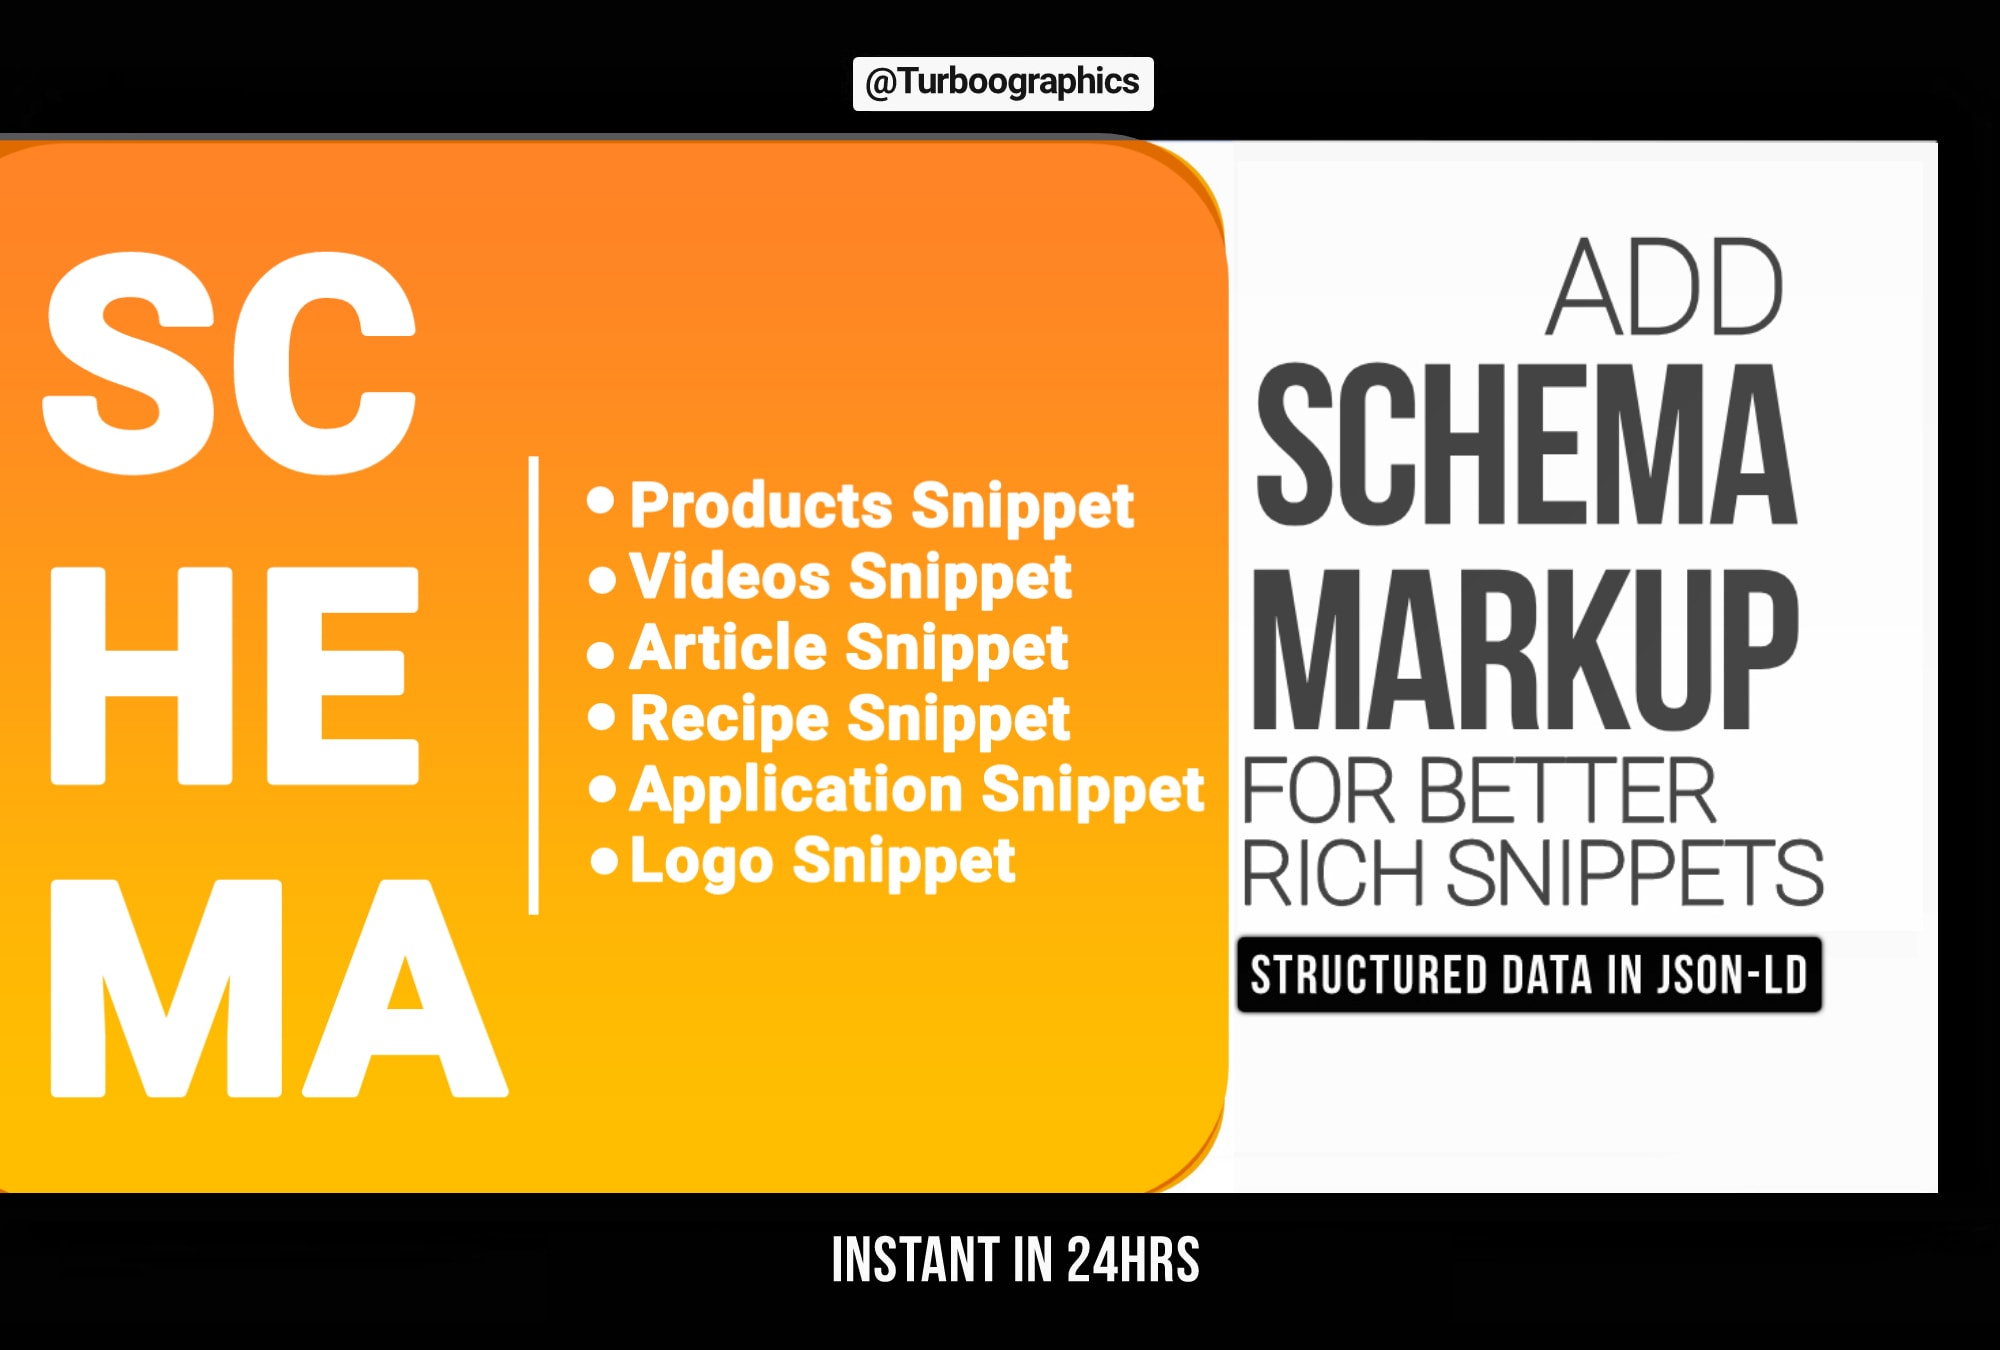 How To: Shopify Recipes on Google with Rich Schema Data